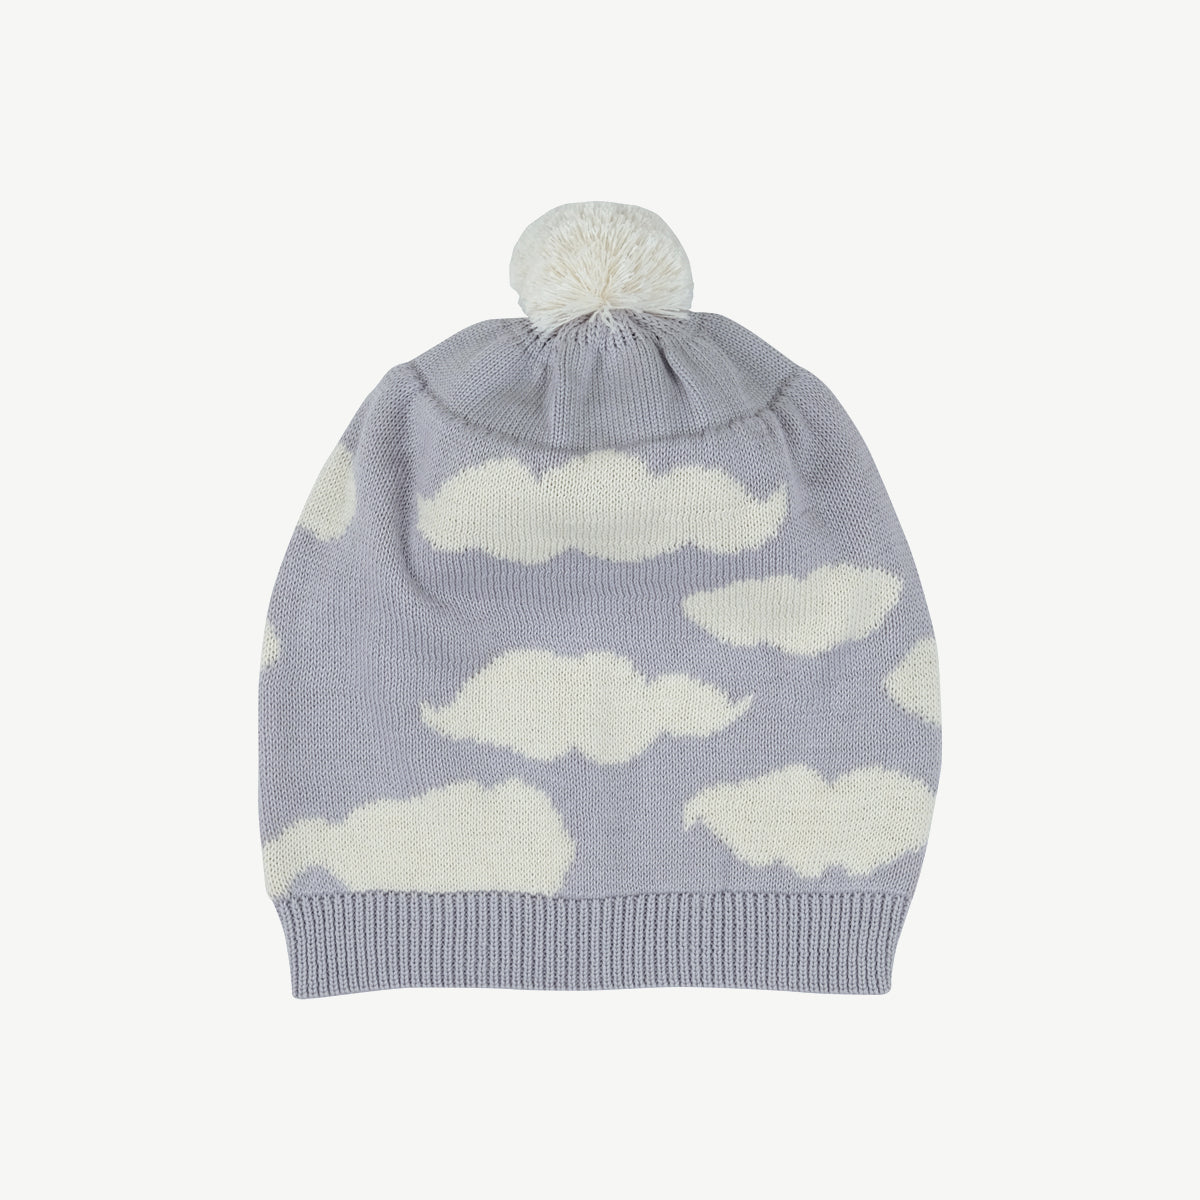 'clouds' gray knit clouds beanie